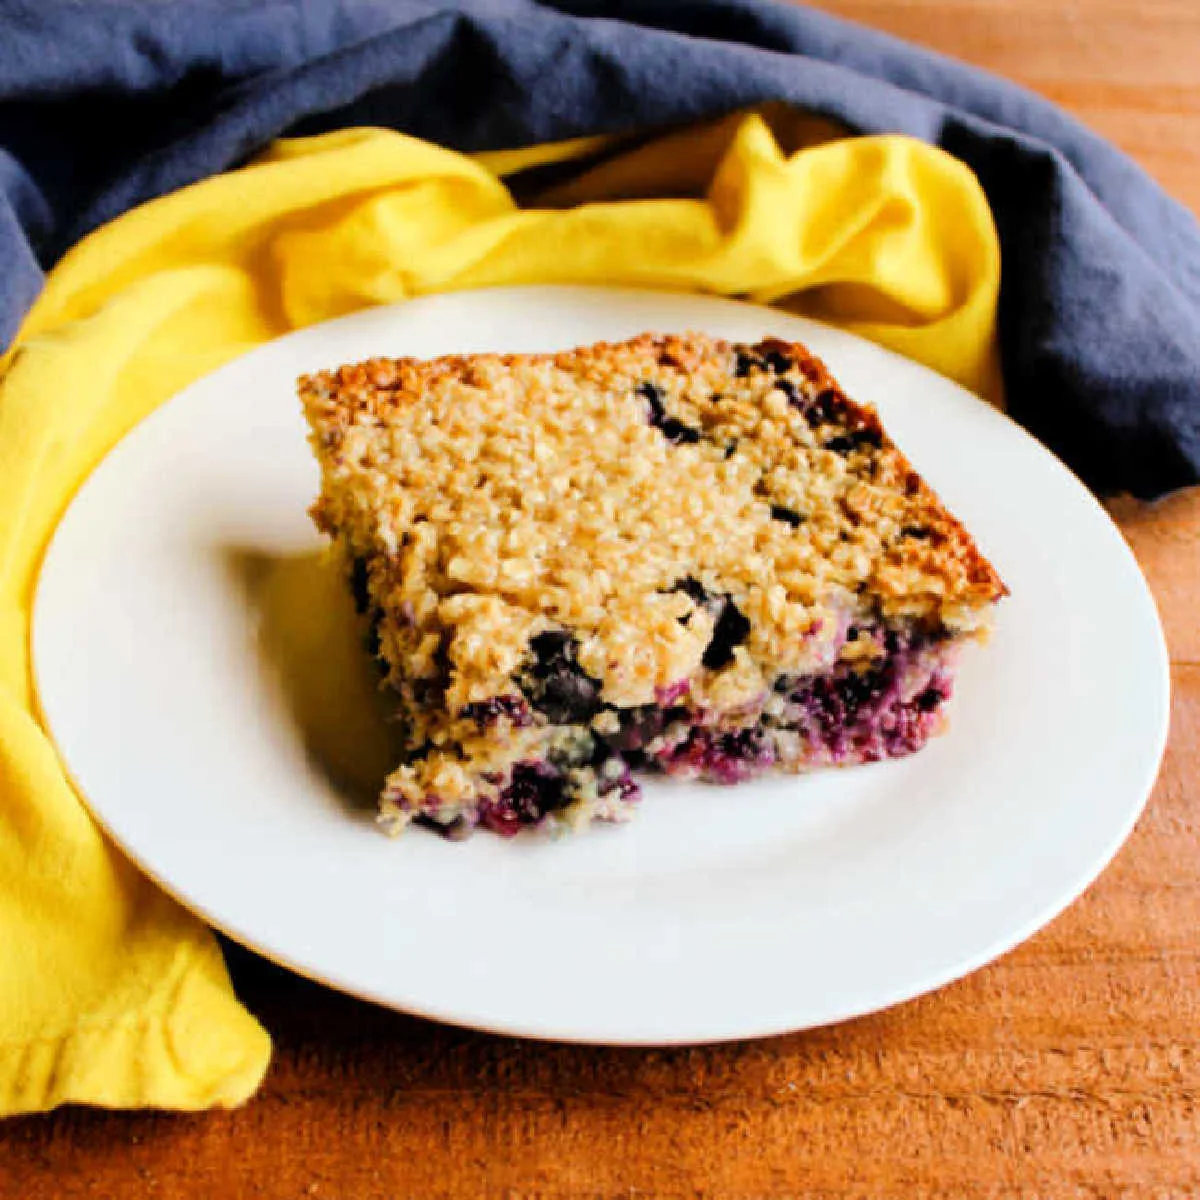 piece of lemon and blueberry baked oatmeal on small plate with blue and yellow napkins nearby